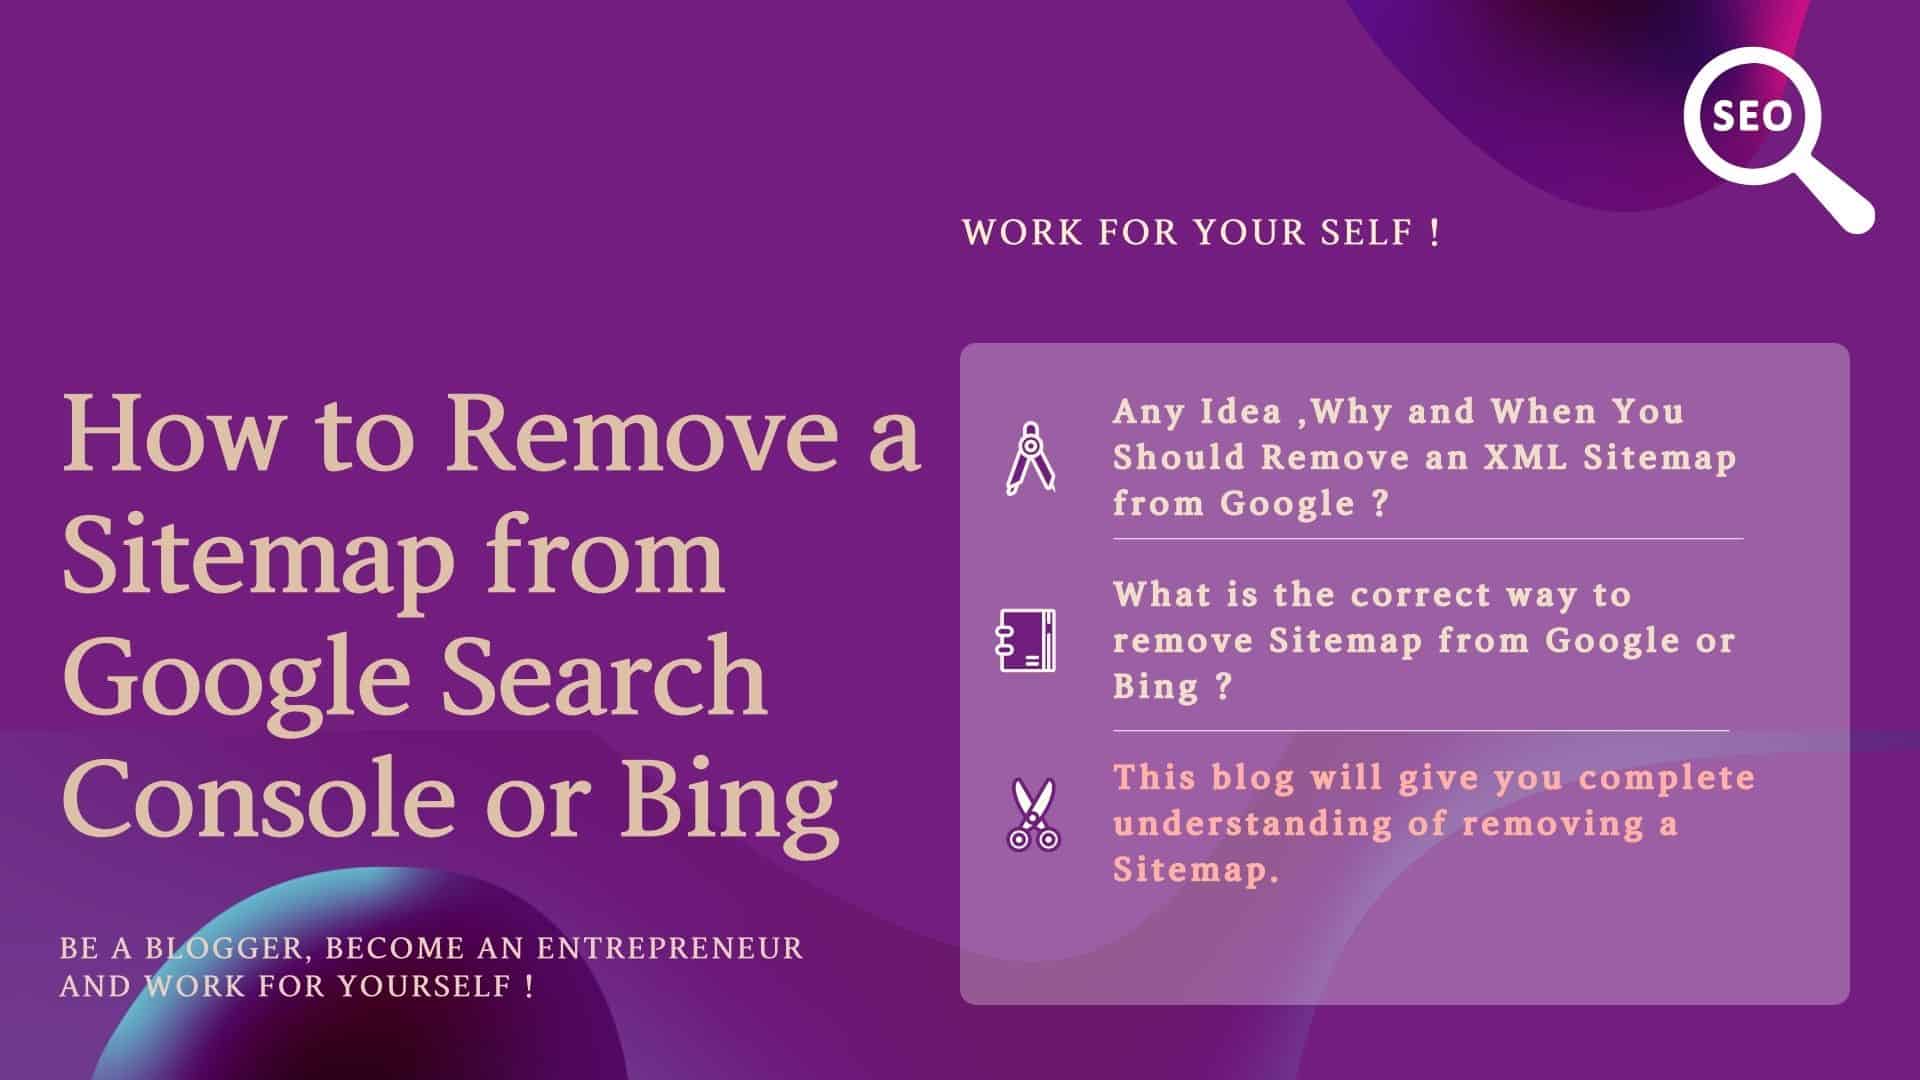 remove sitemap from google search console or bing